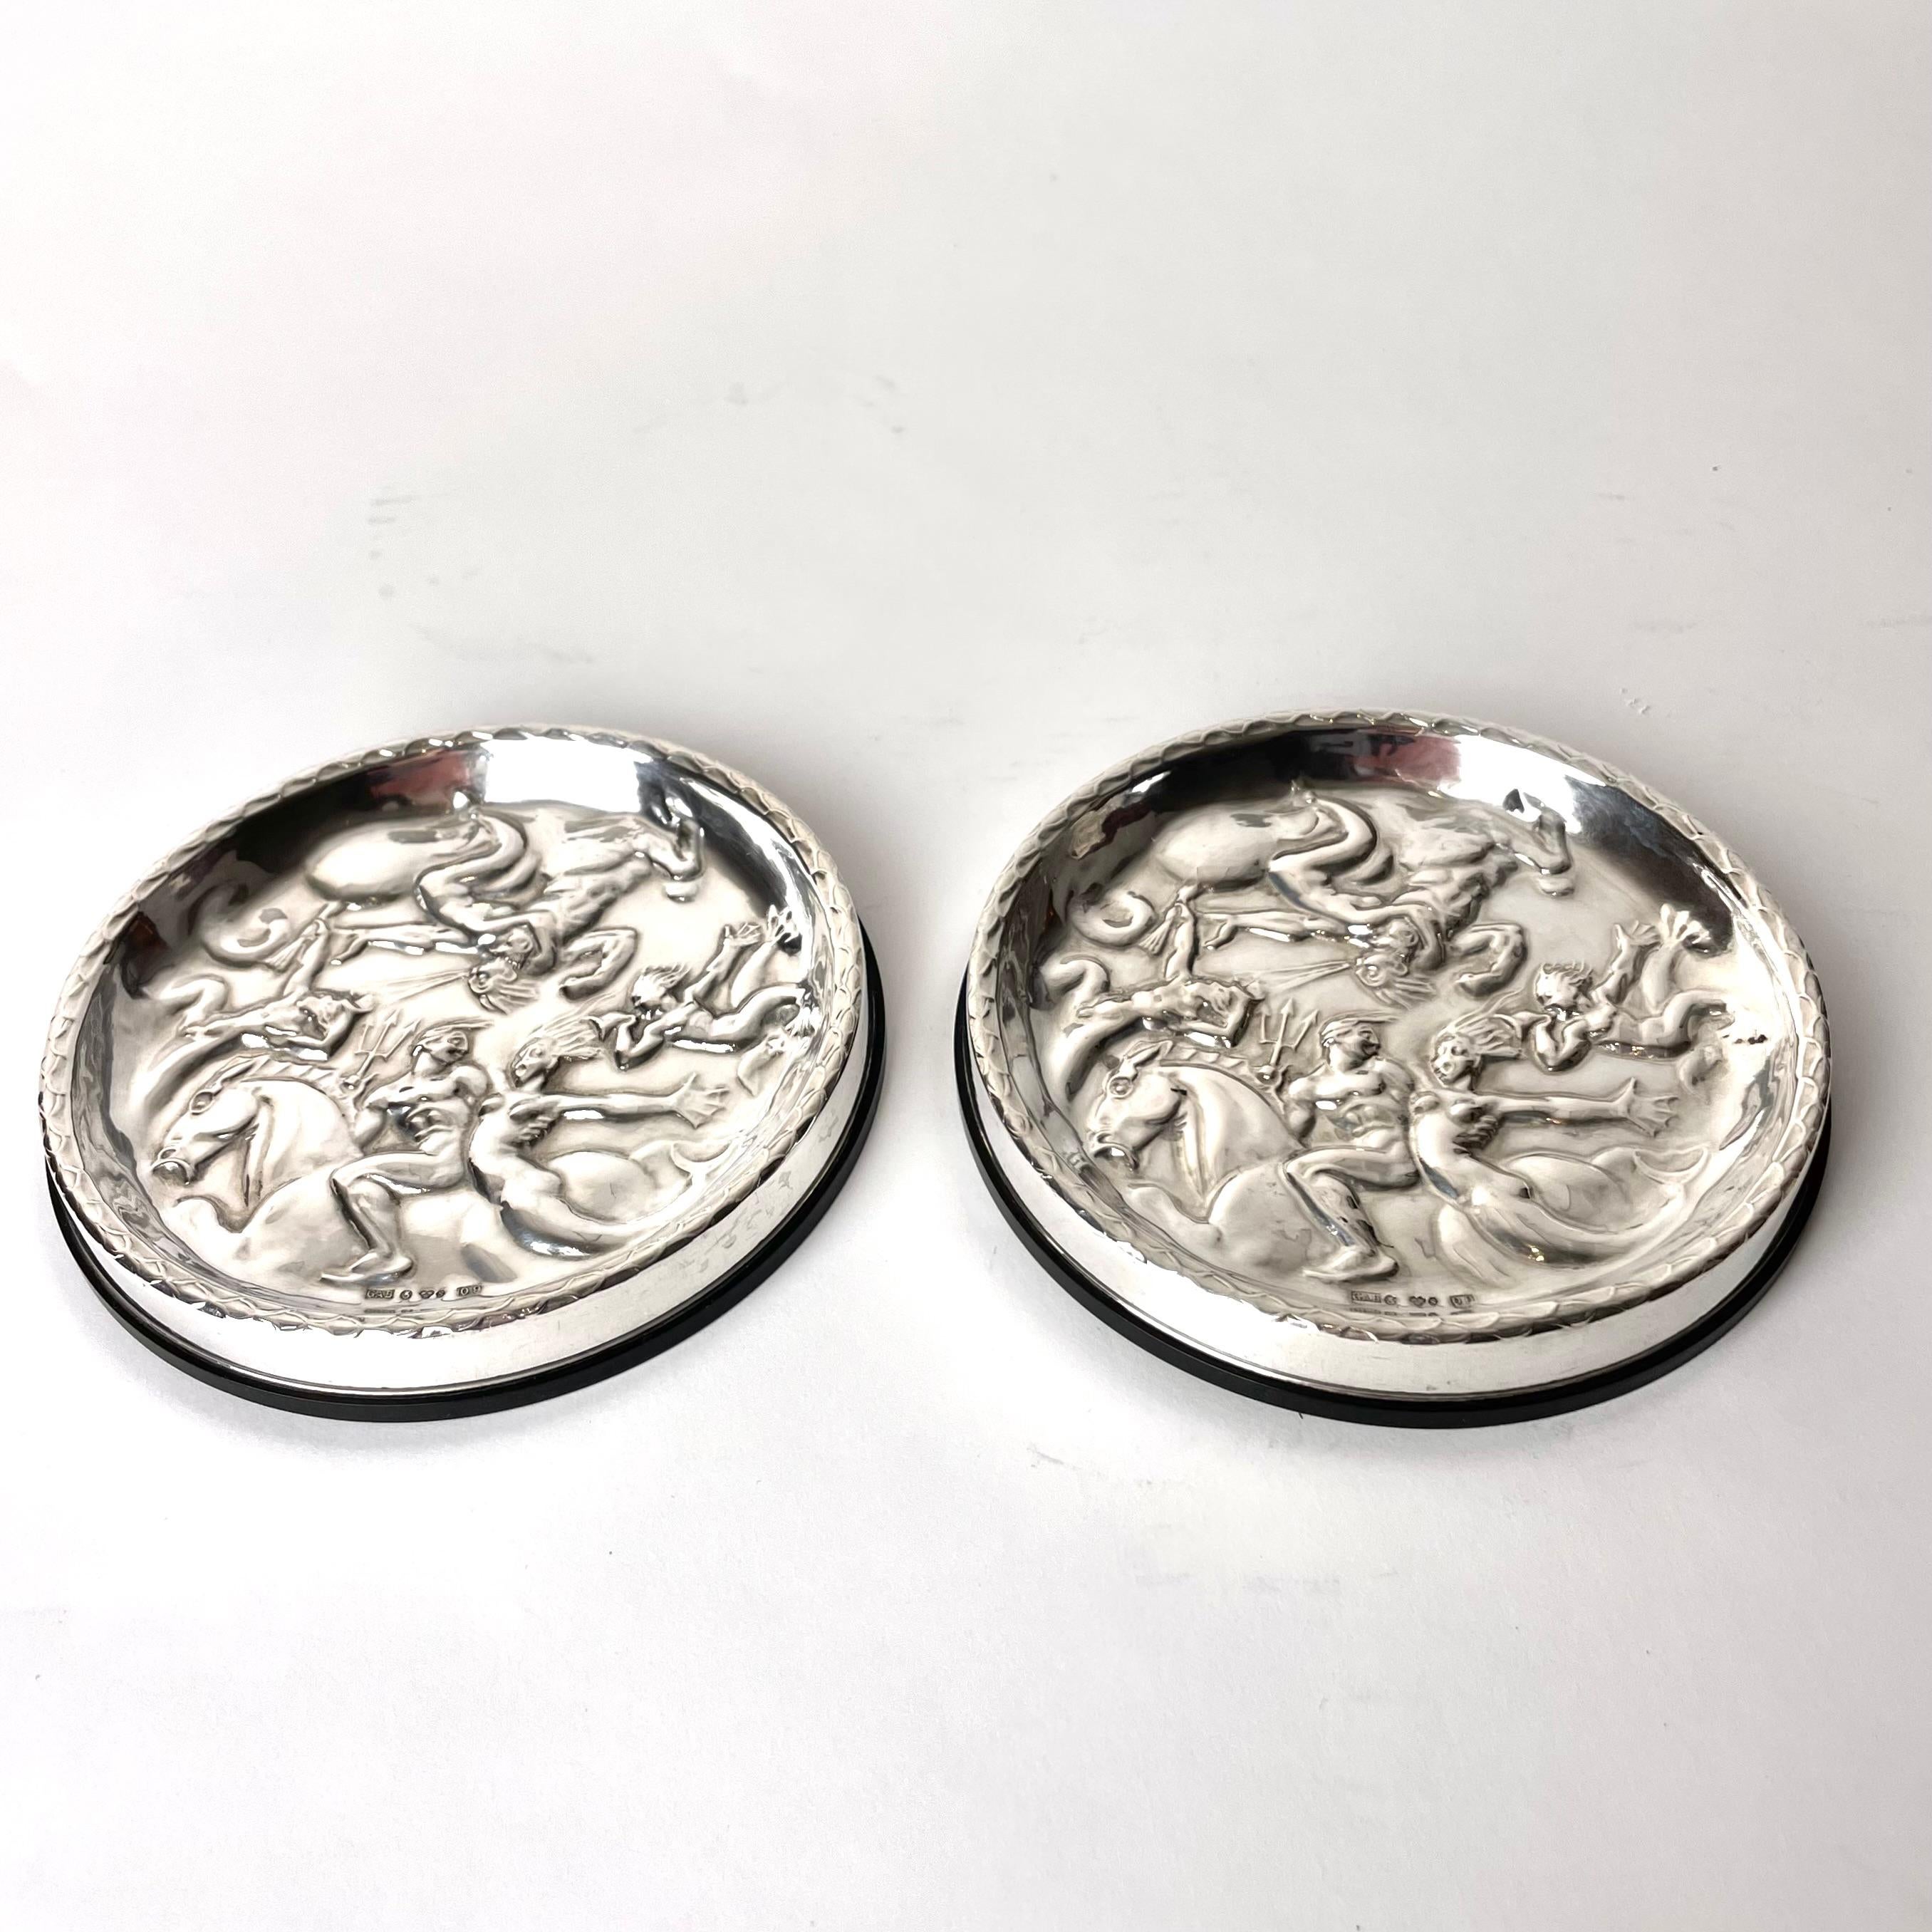 Beautiful pair of Coasters in Silver and Bakelite. After Carl Milles (1875-1955) 
”The wind game” 1937. These coasters are manufactured by GAB 
(Guldsmedsbolaget) in 1964 in Swedish controlled silver.


Wear consistent with age and use 